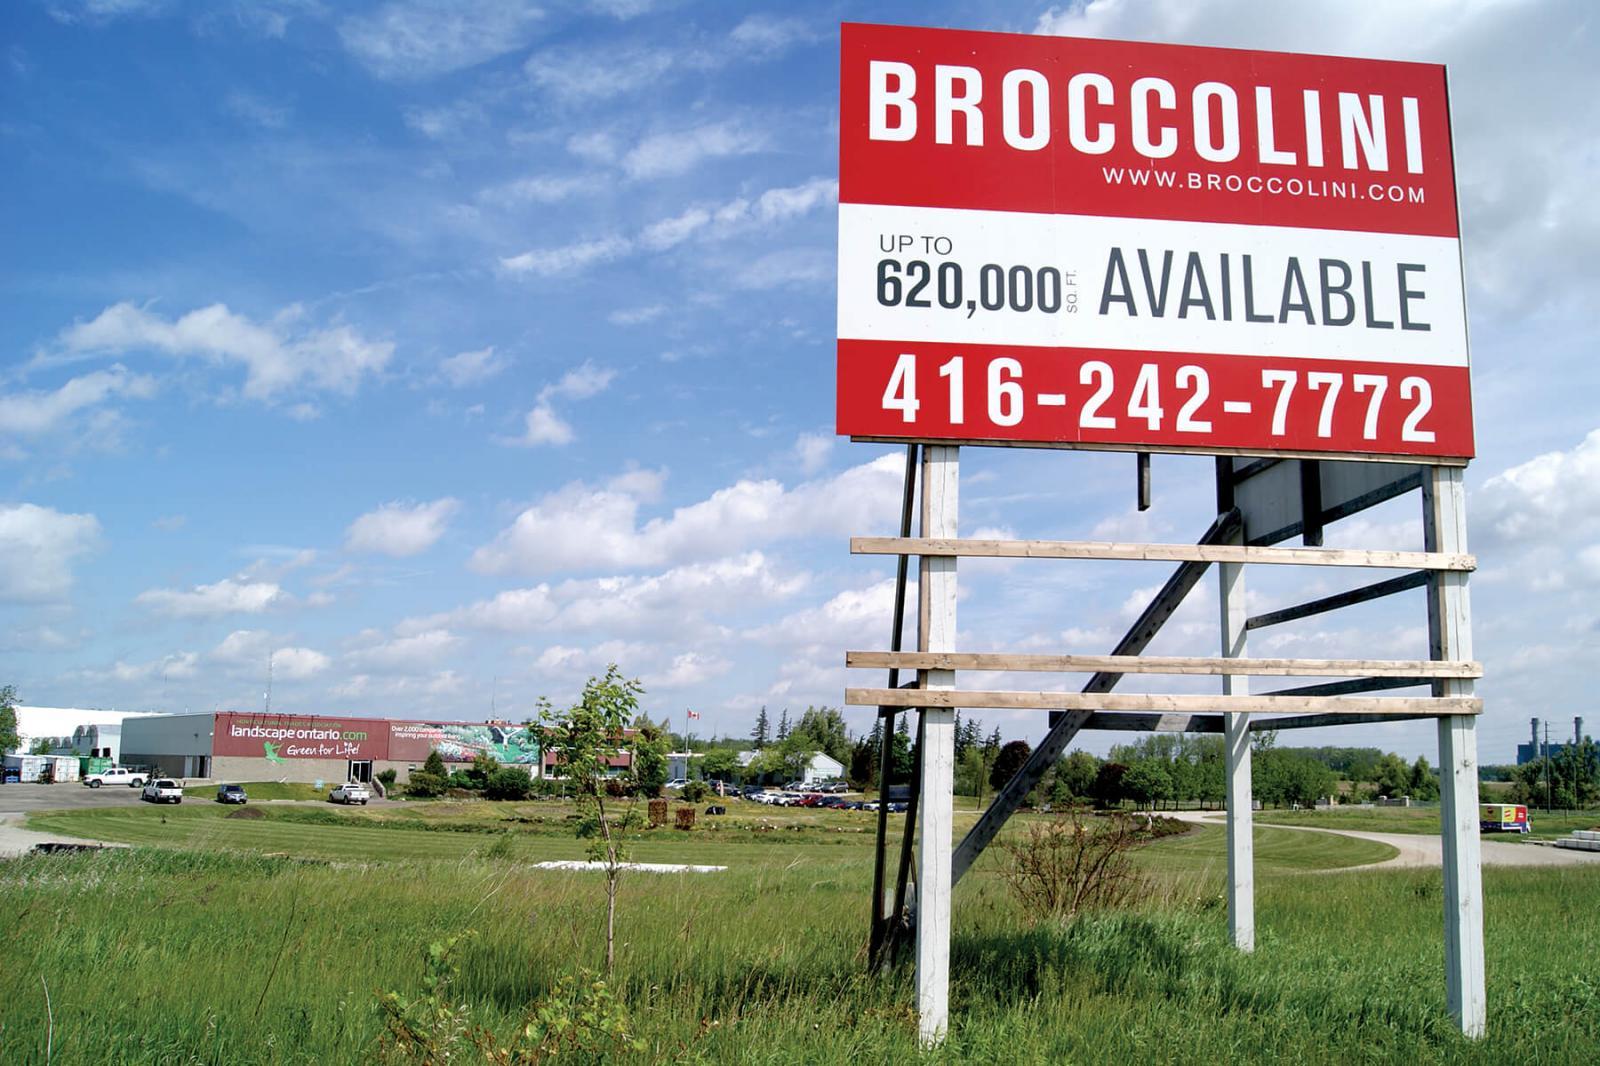 It became official on May 28, when Landscape Ontario sold 24.16 acres of excess property to Broccolini, a development and construction company.